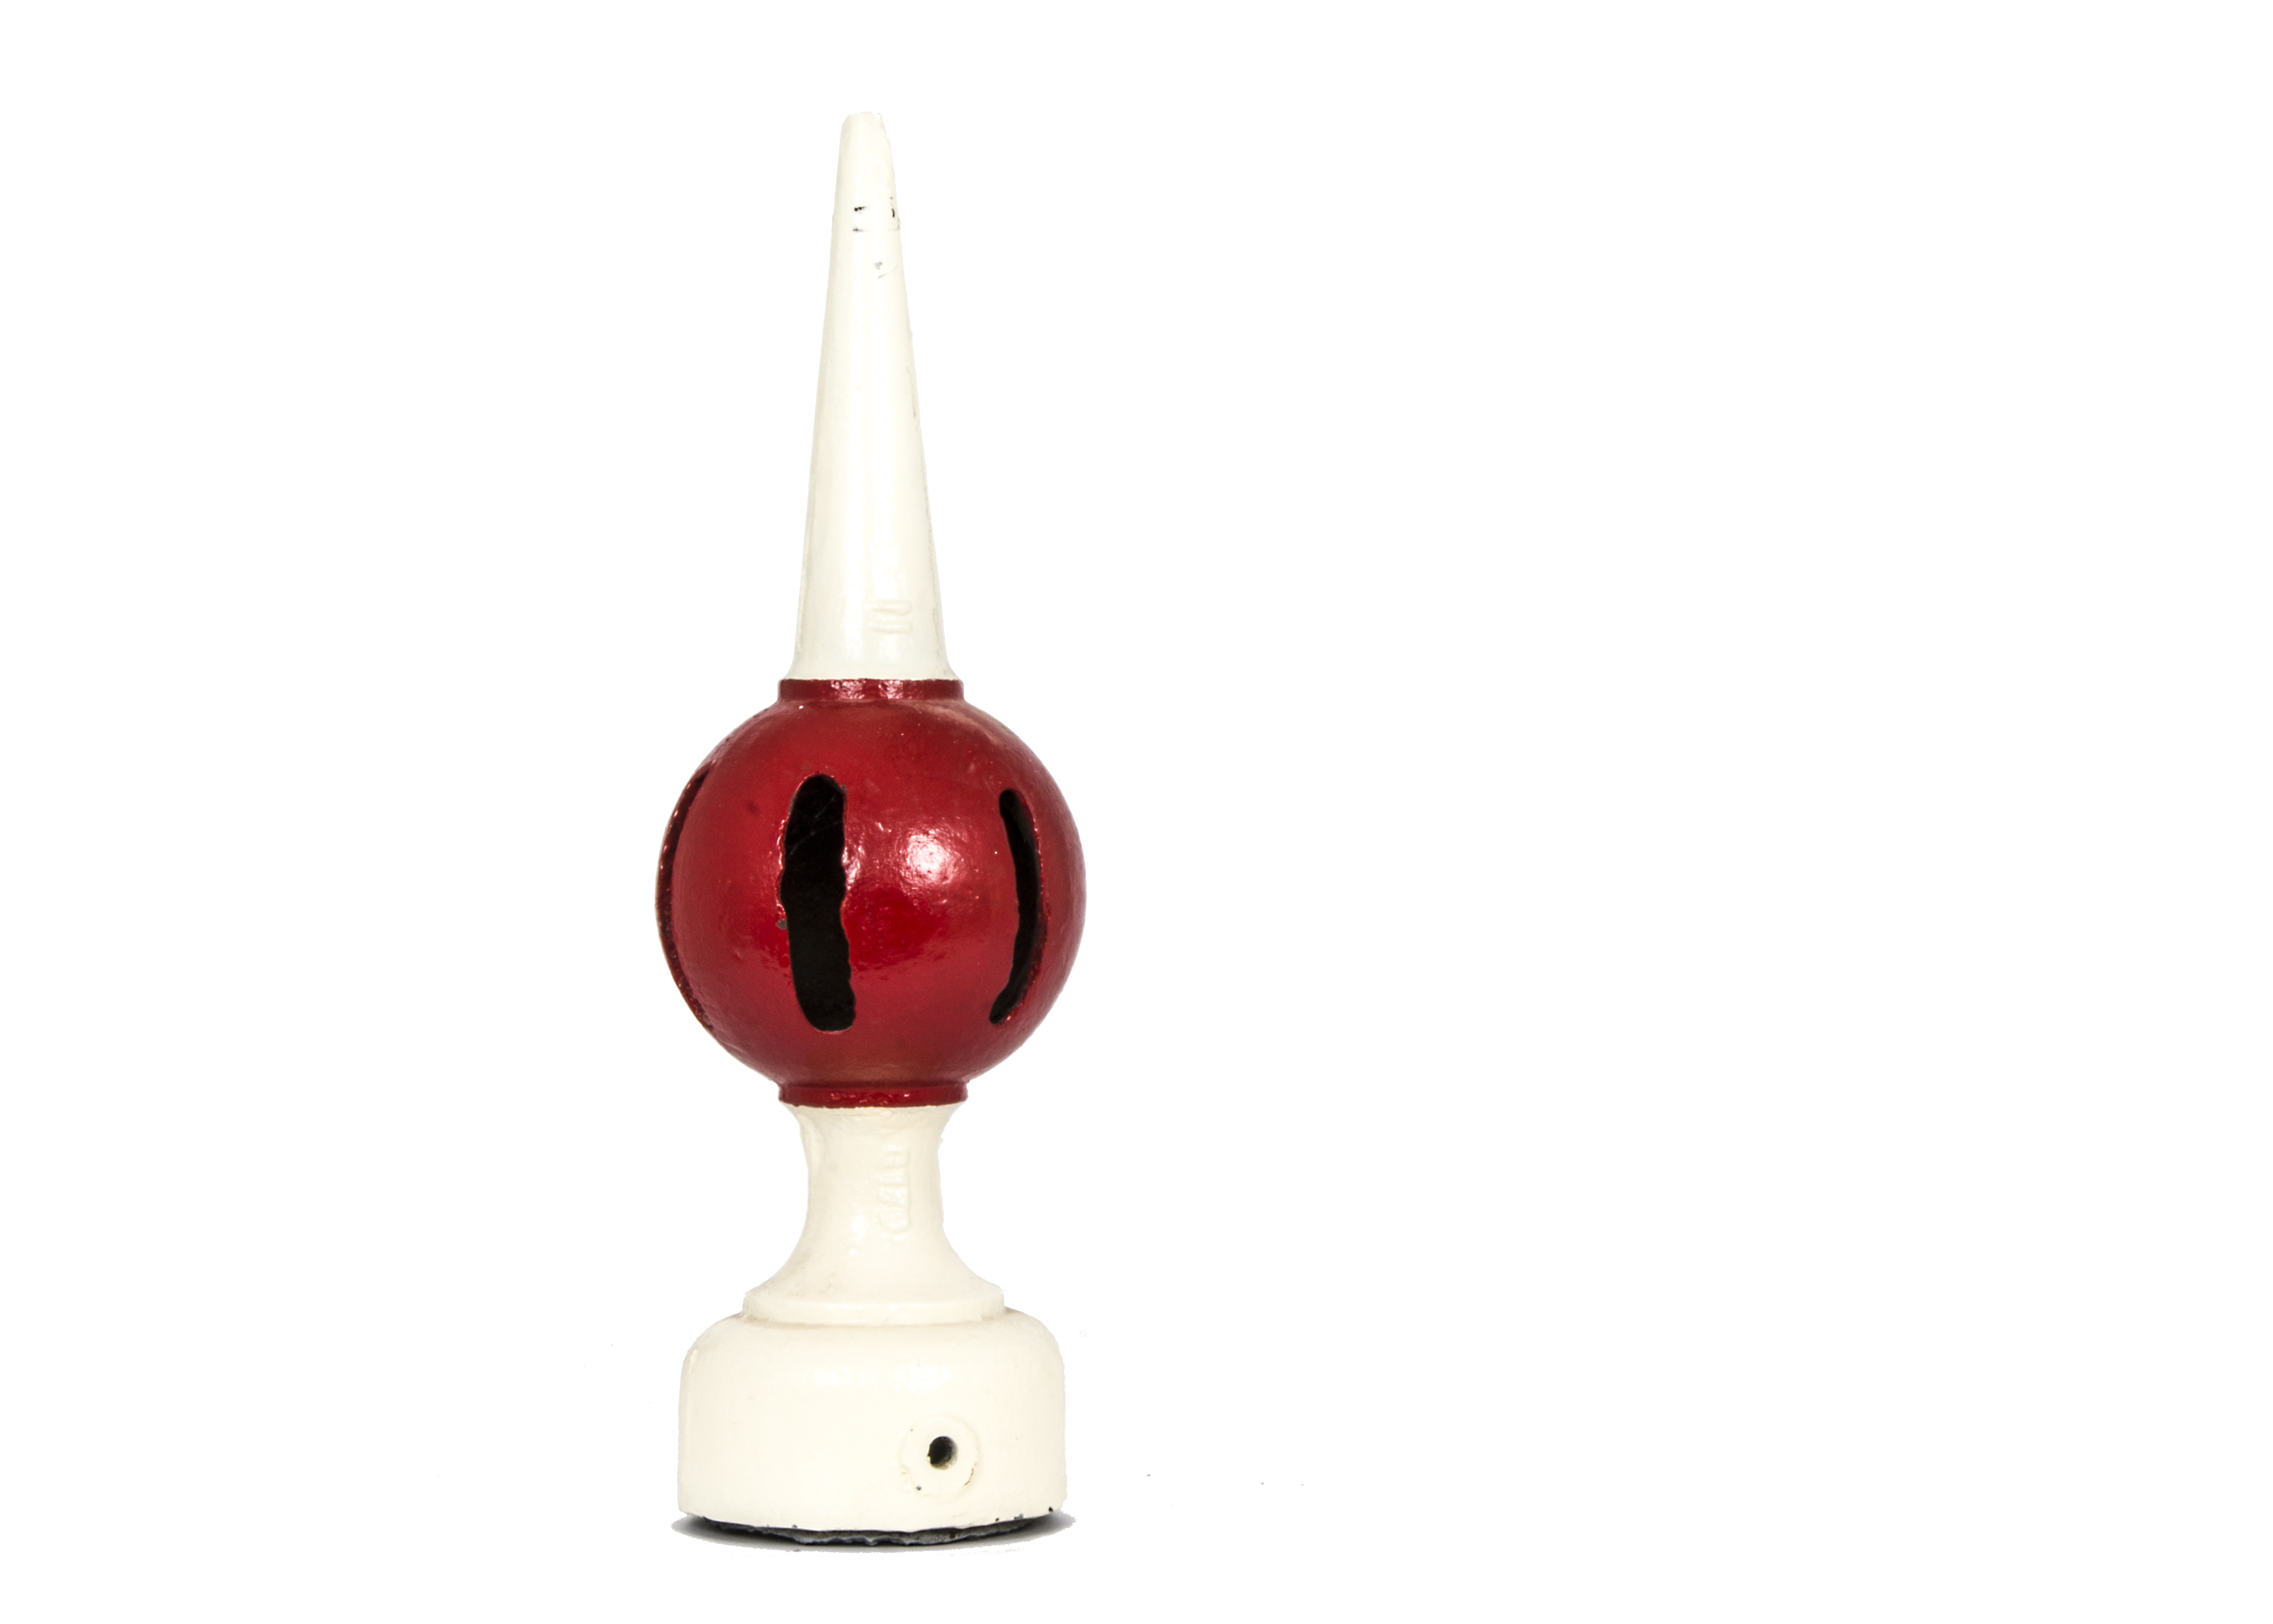 A Great Western Railway Signal Finial, of ball-and-spike design, repainted in white and red